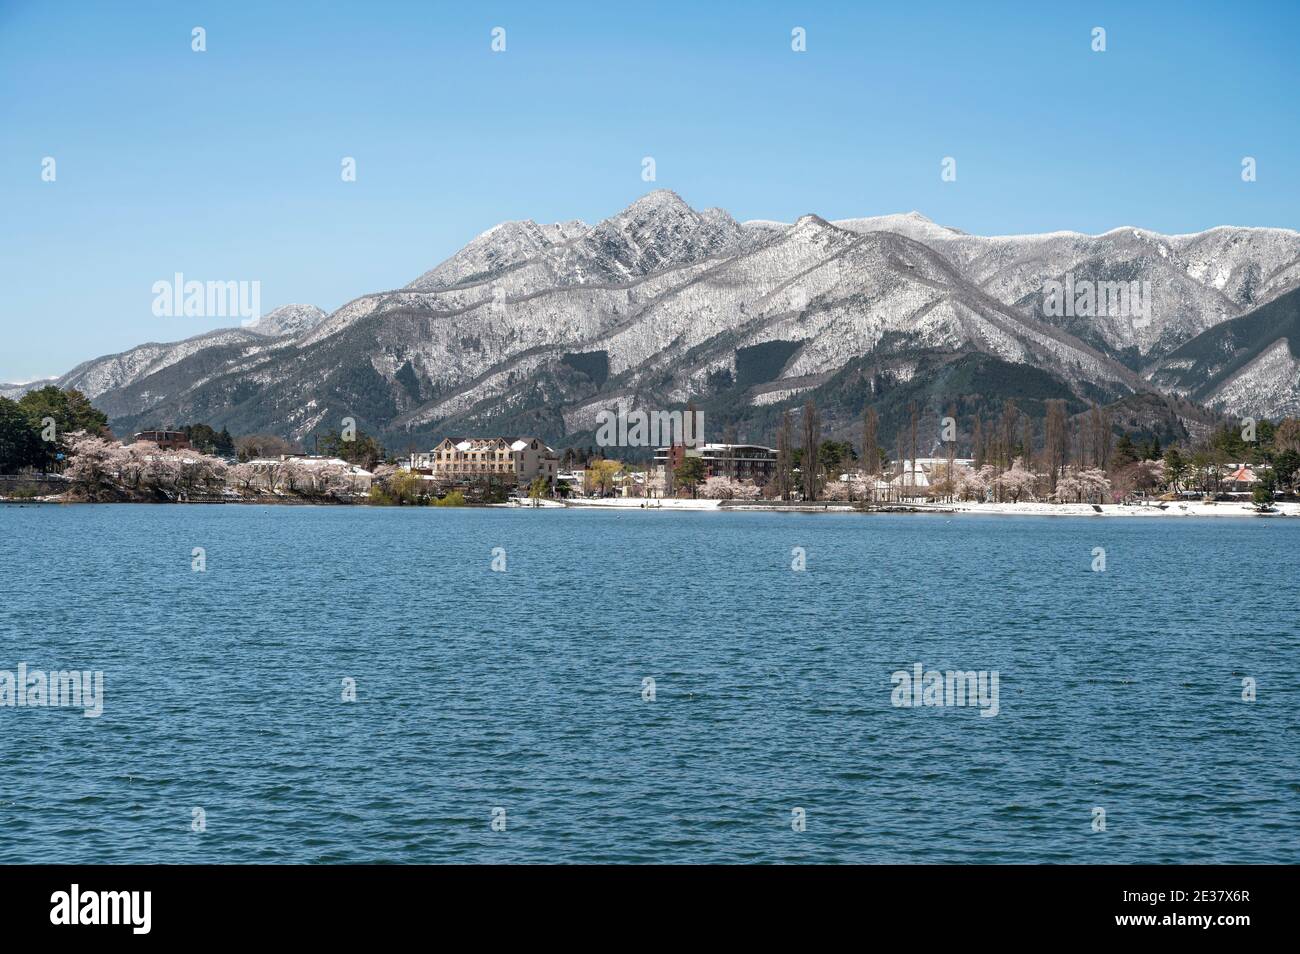 The aftermath of a spring blizzard on the shores of lake Kawaguchi. Stock Photo